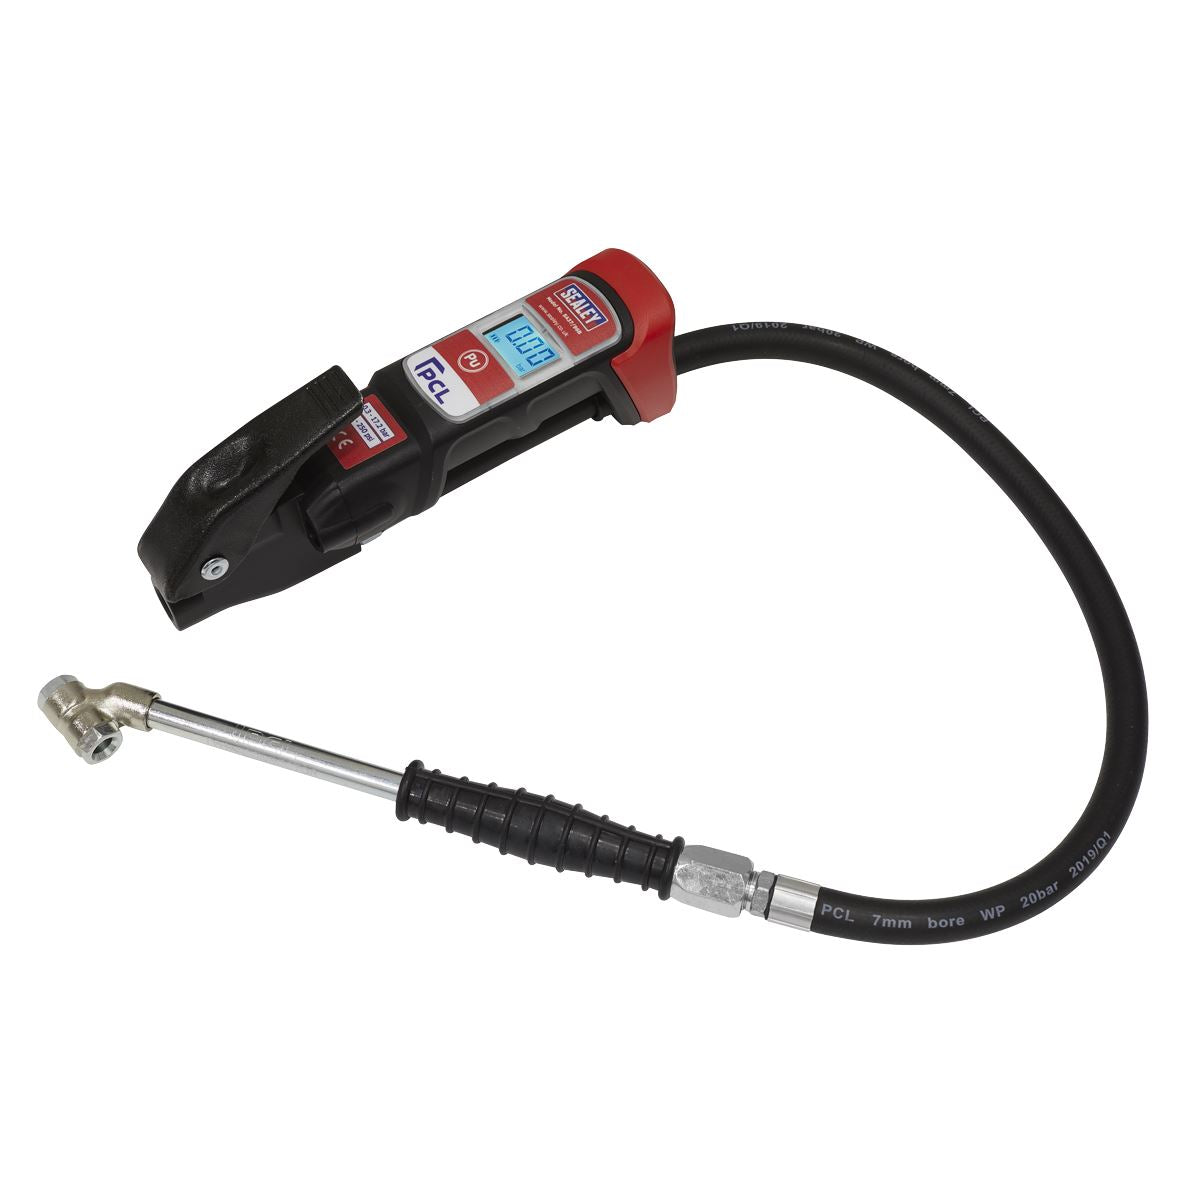 PCL Premier Anodised Digital Tyre Inflator with Twin Push-On Connector